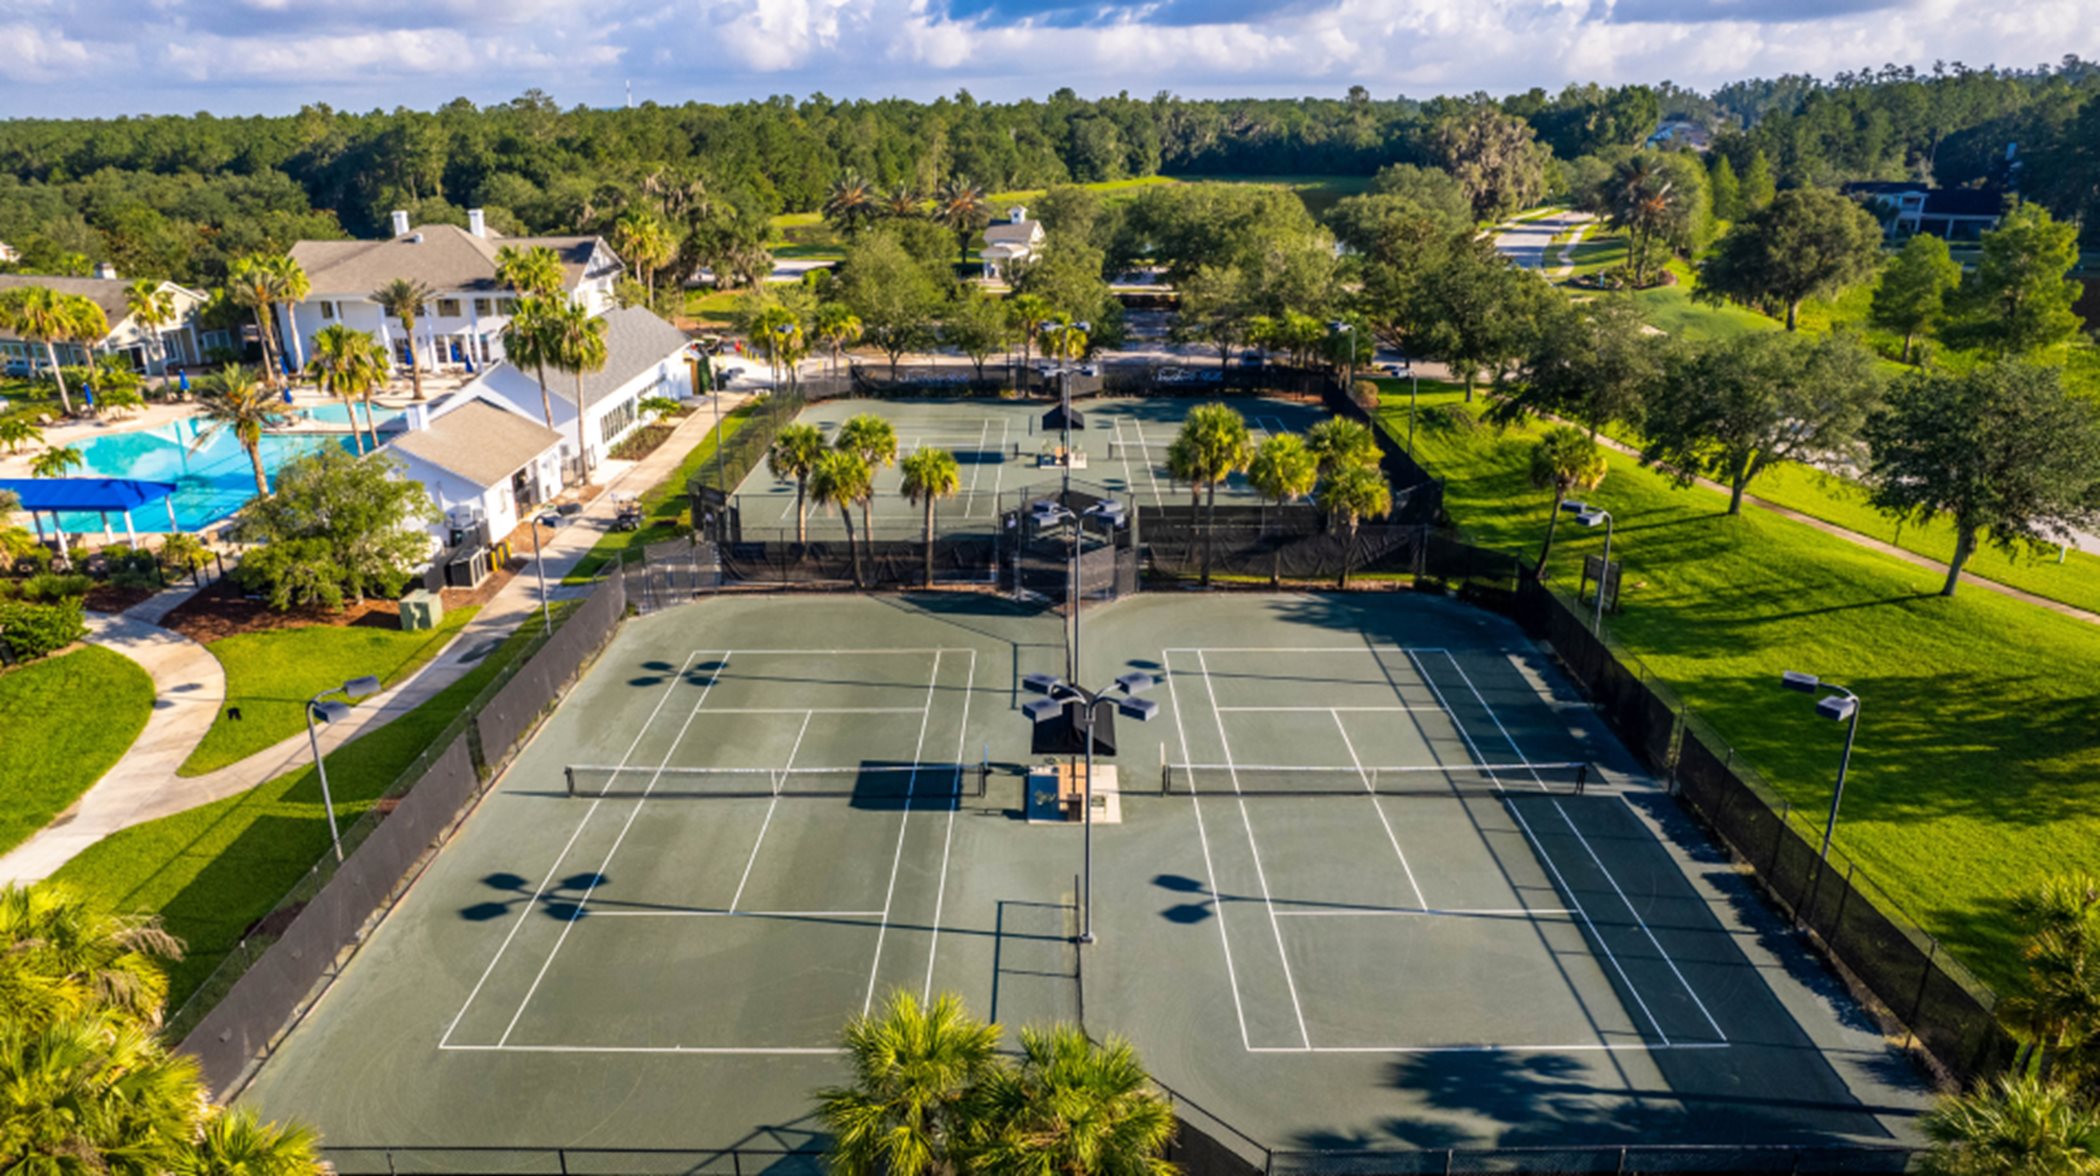 Southern hills tennis aerial view